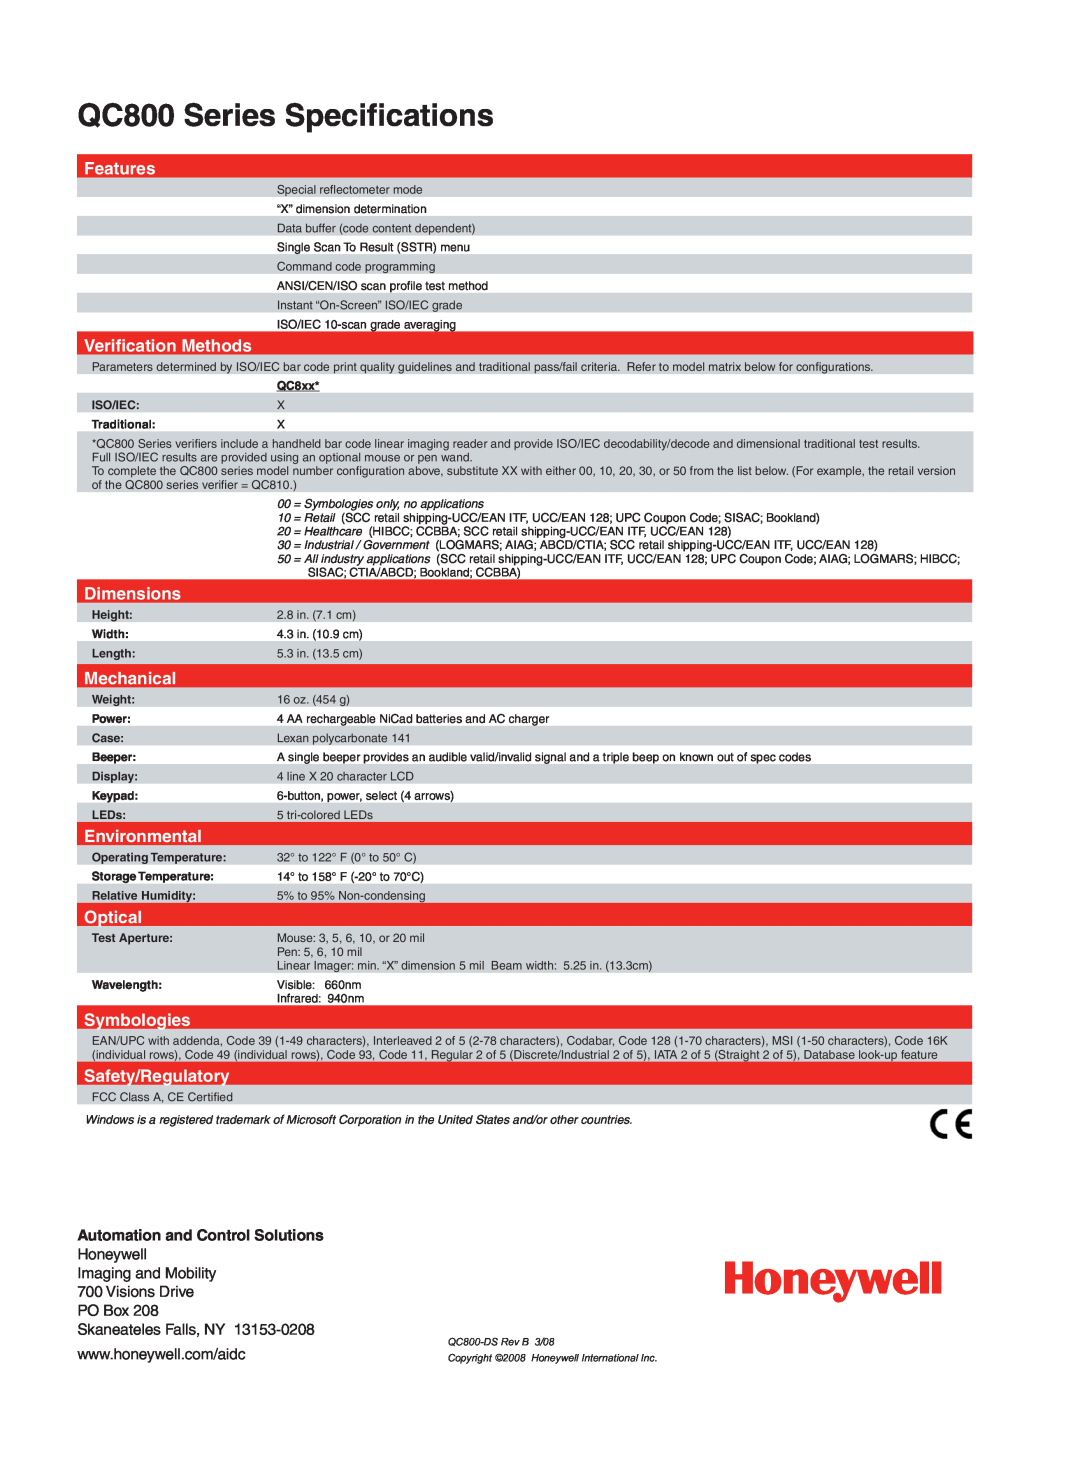 Honeywell QC800 Series Speciﬁcations, Features, Veriﬁcation Methods, Dimensions, Mechanical, Environmental, Optical 